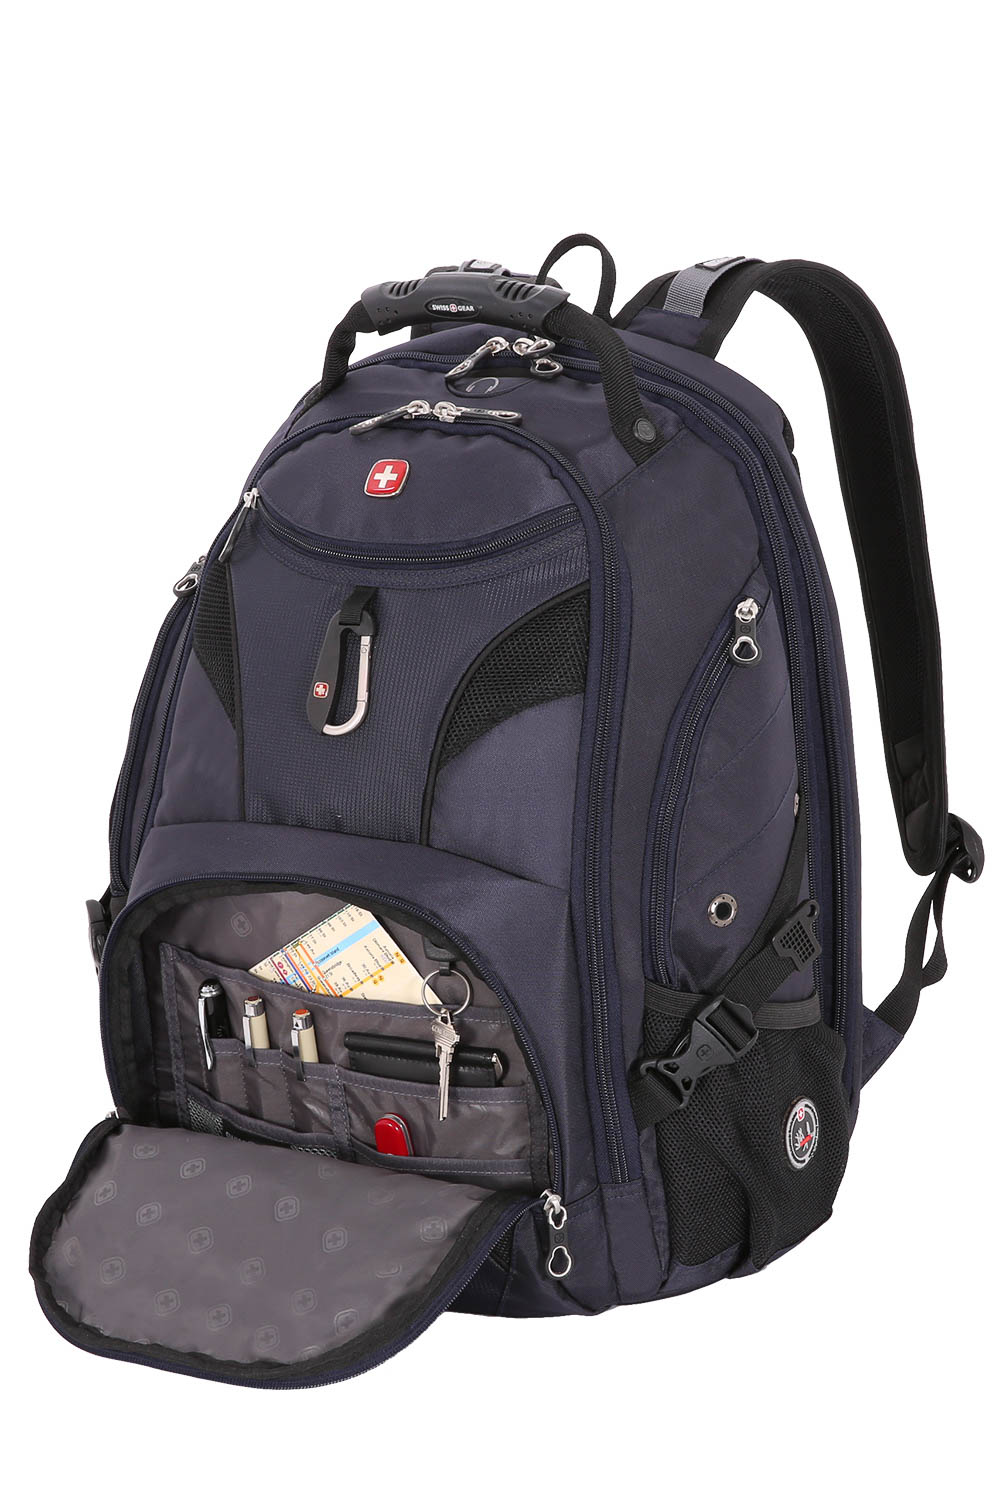 Swiss Gear Persimmon Backpack - Shop Backpacks at H-E-B